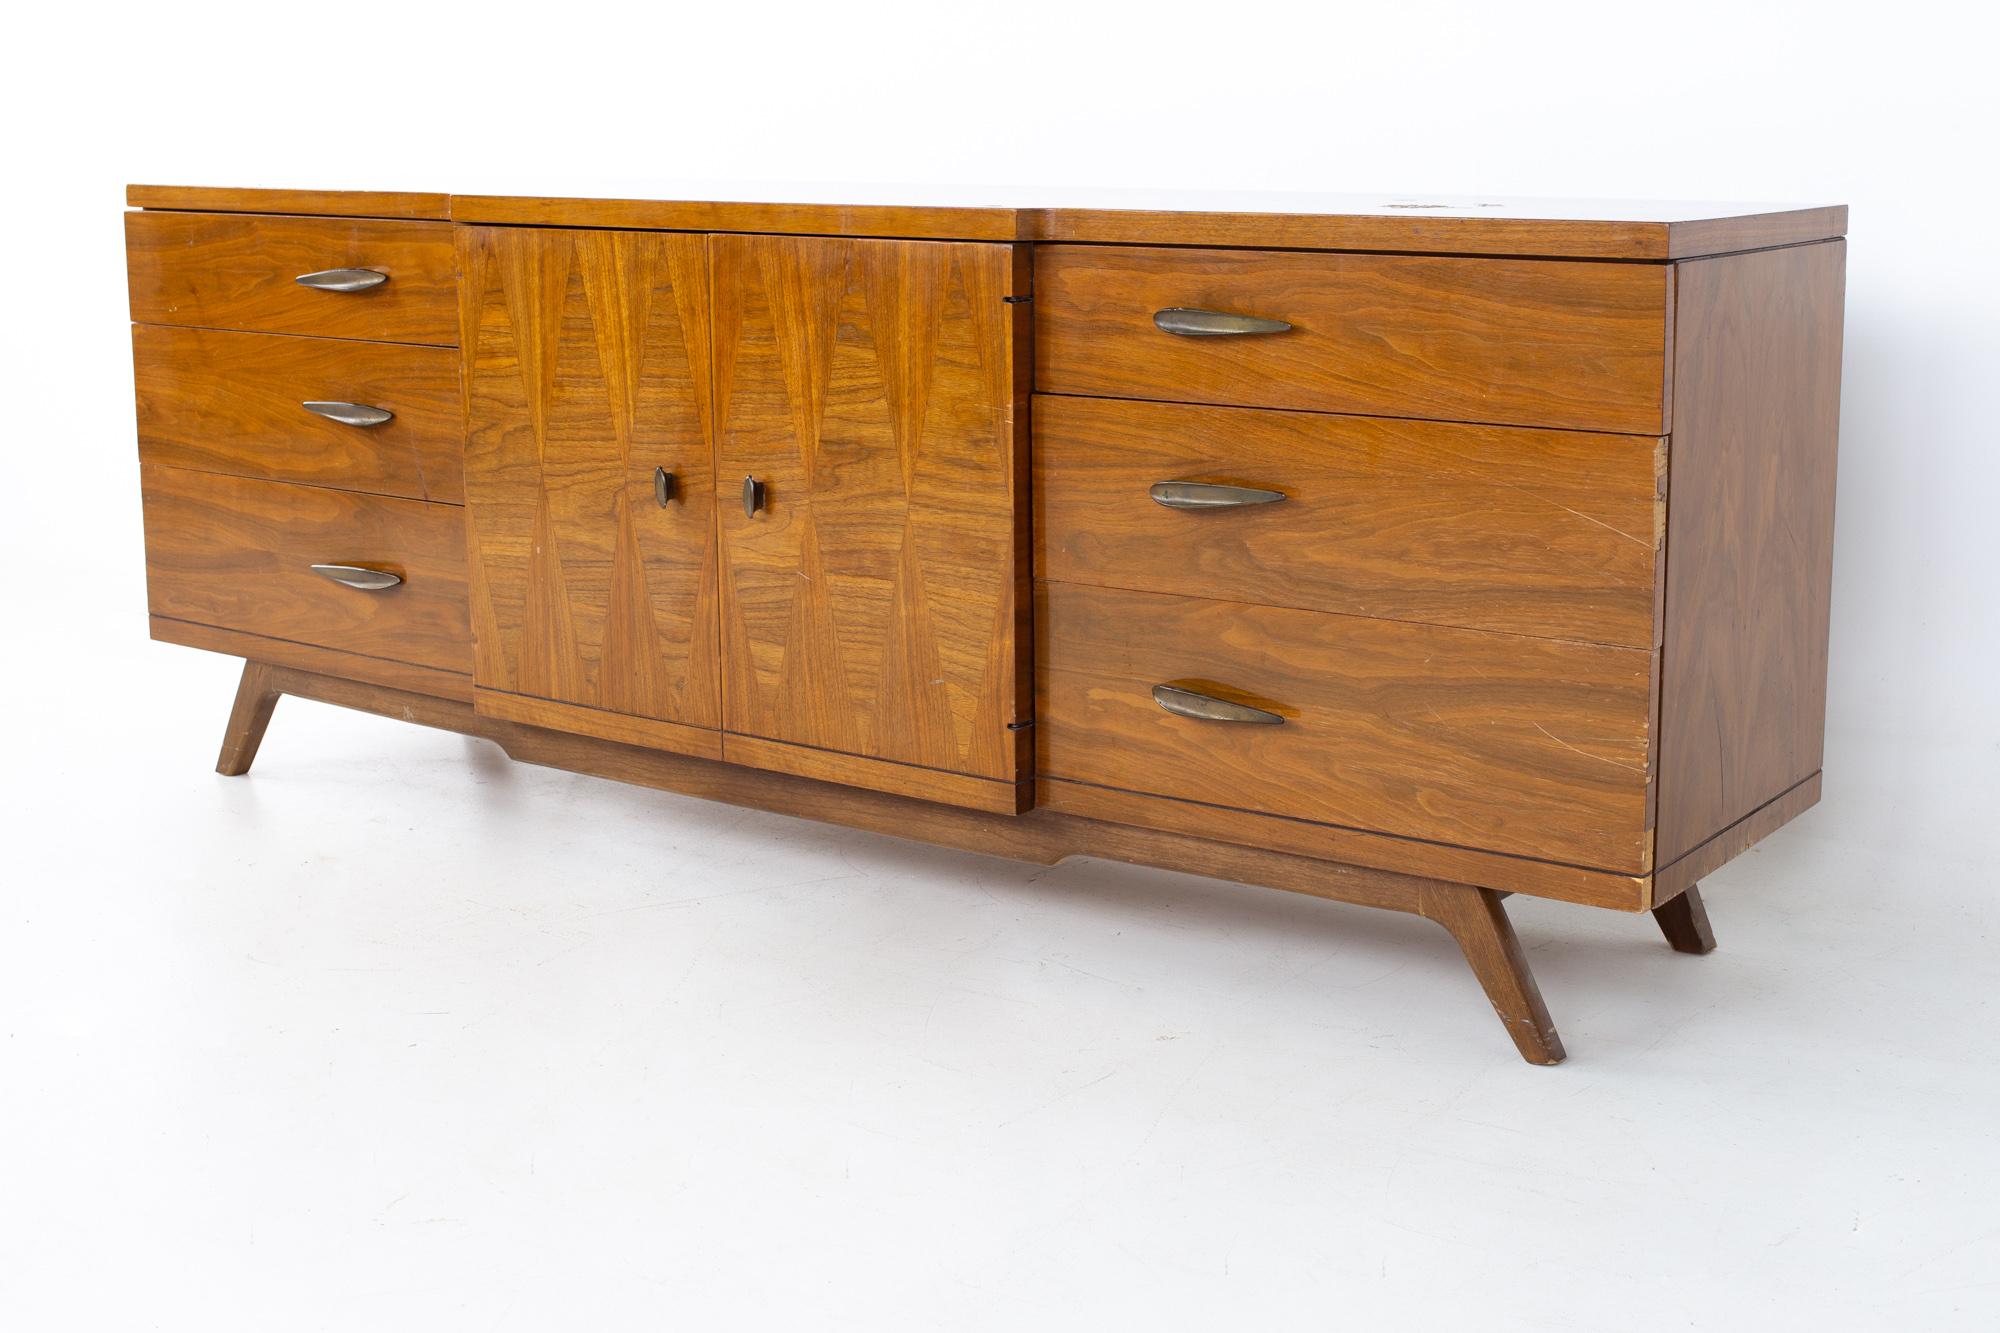 Lane Harlequin Mid Century inlaid walnut 9 drawer lowboy dresser
Dresser measures: 80.5 wide x 17.5 deep x 30 inches high

All pieces of furniture can be had in what we call restored vintage condition. That means the piece is restored upon